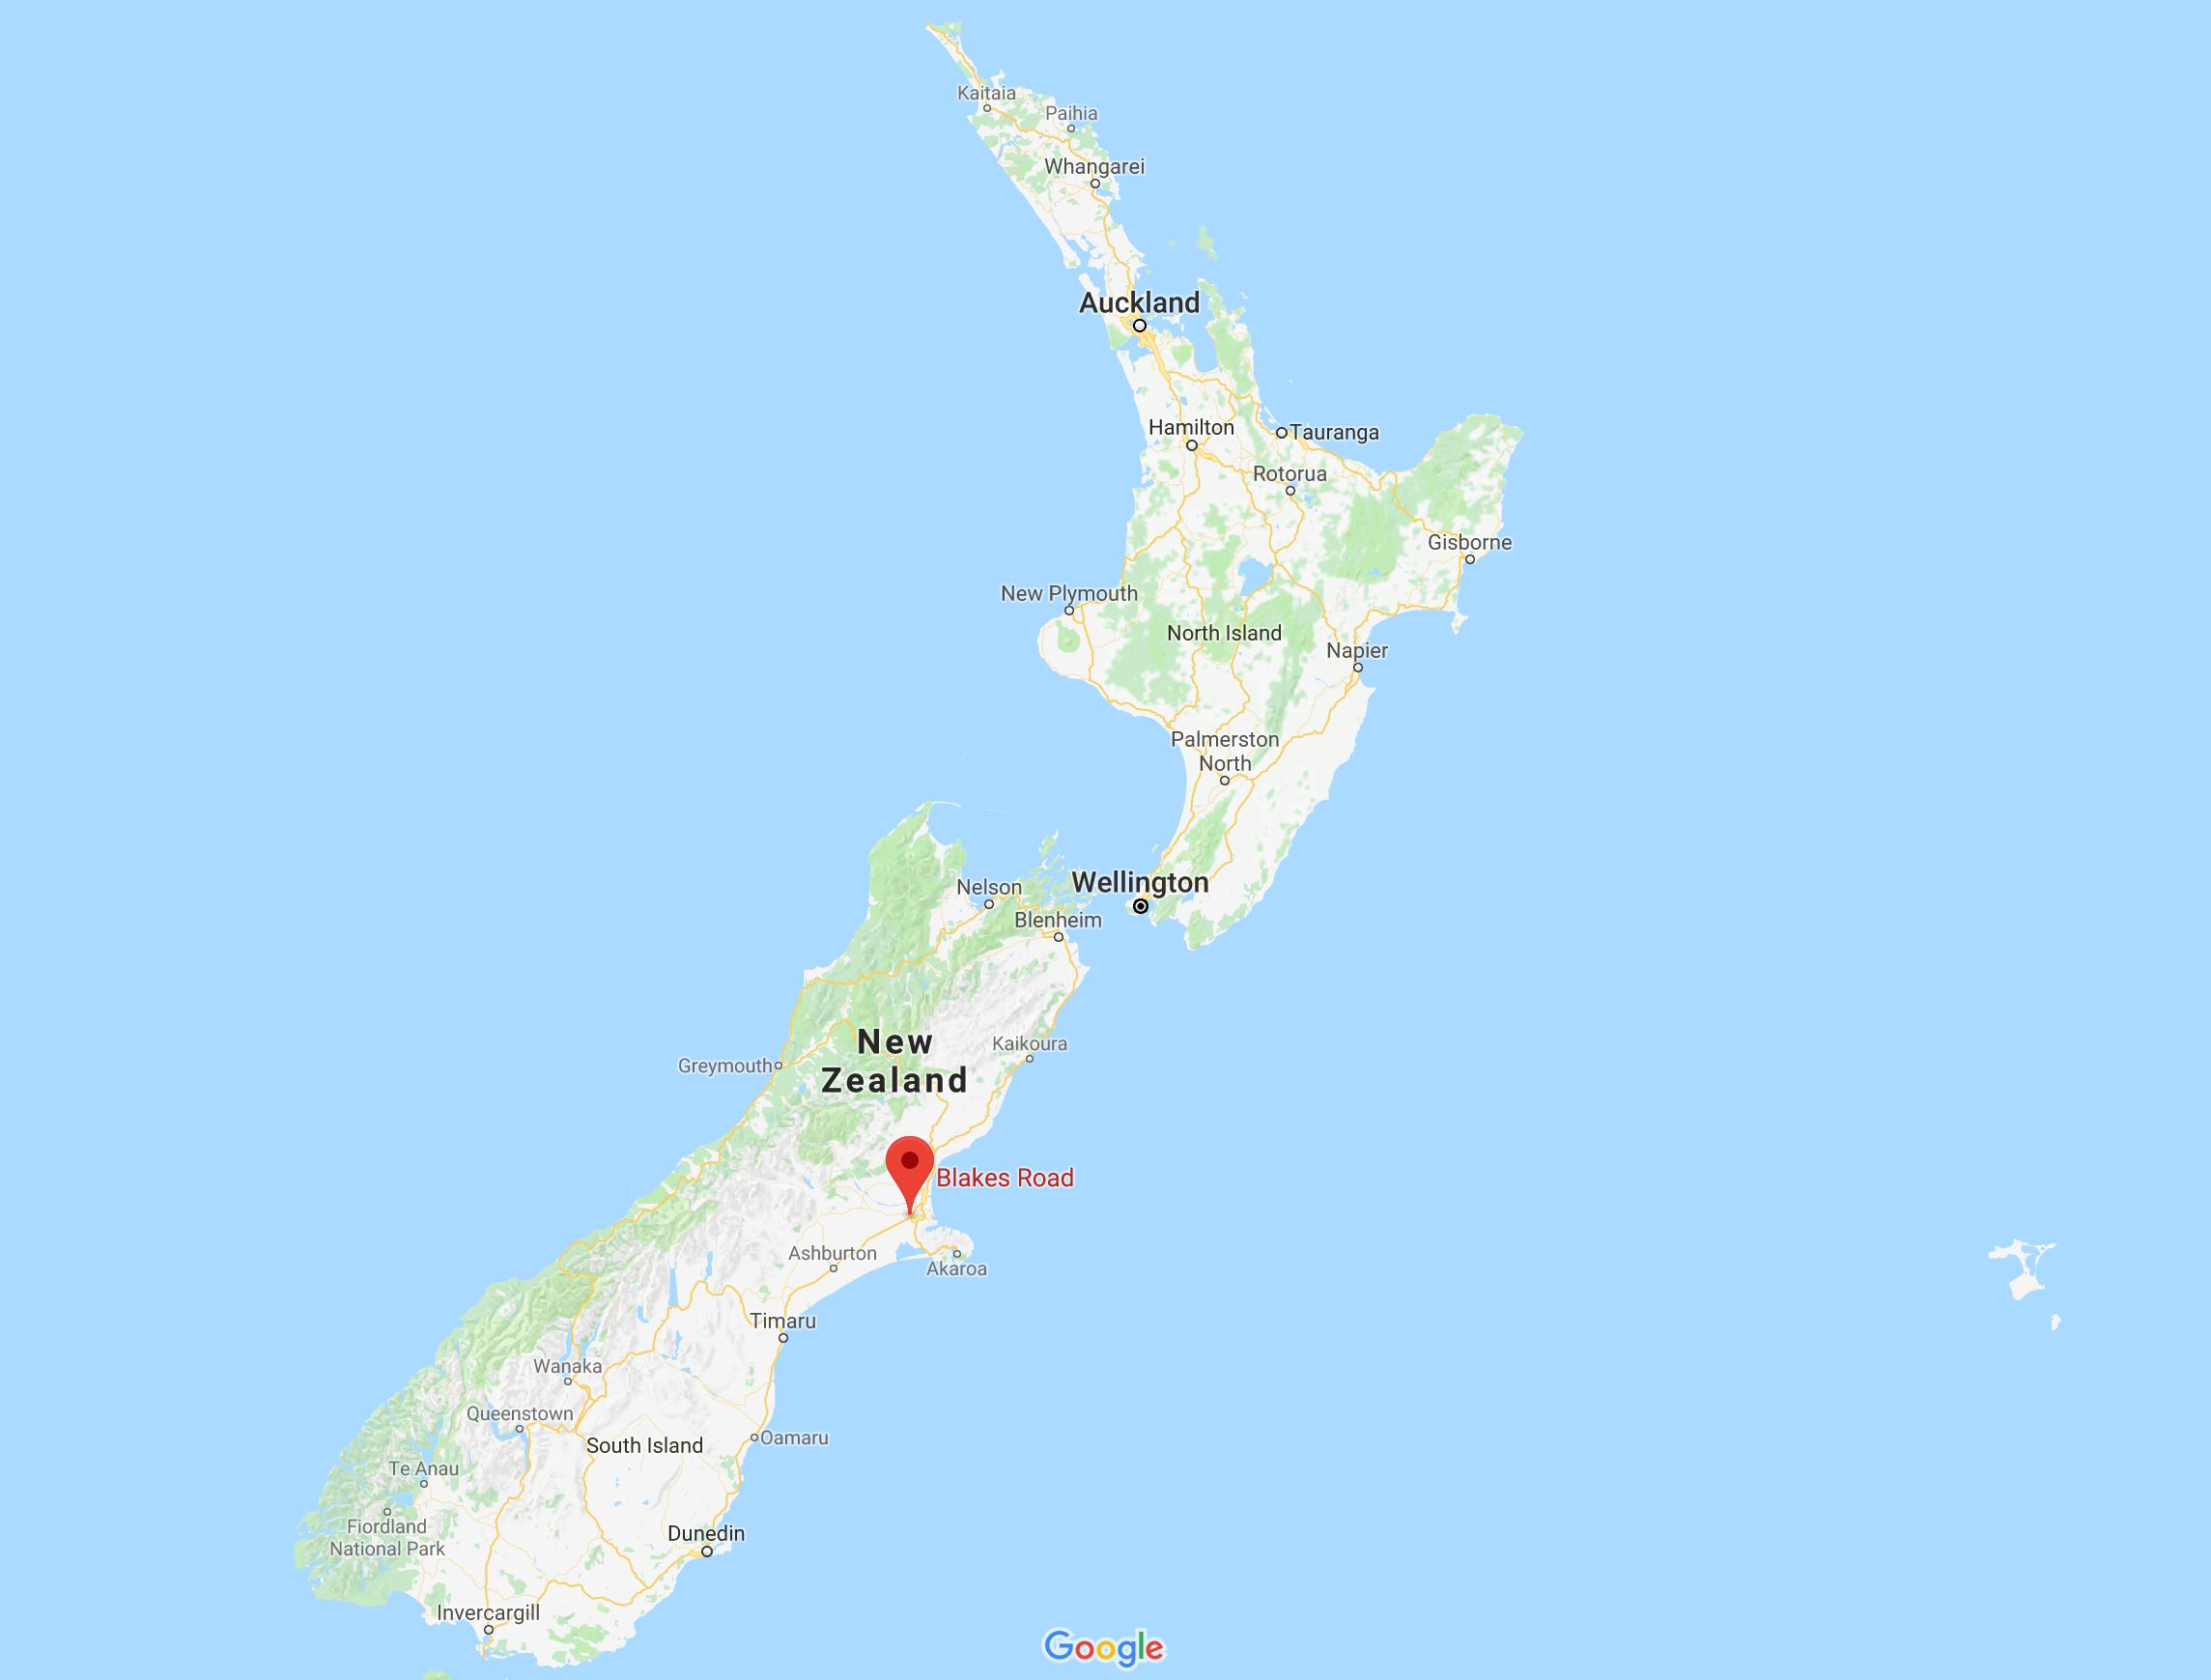 The location of the incident (Google Maps)